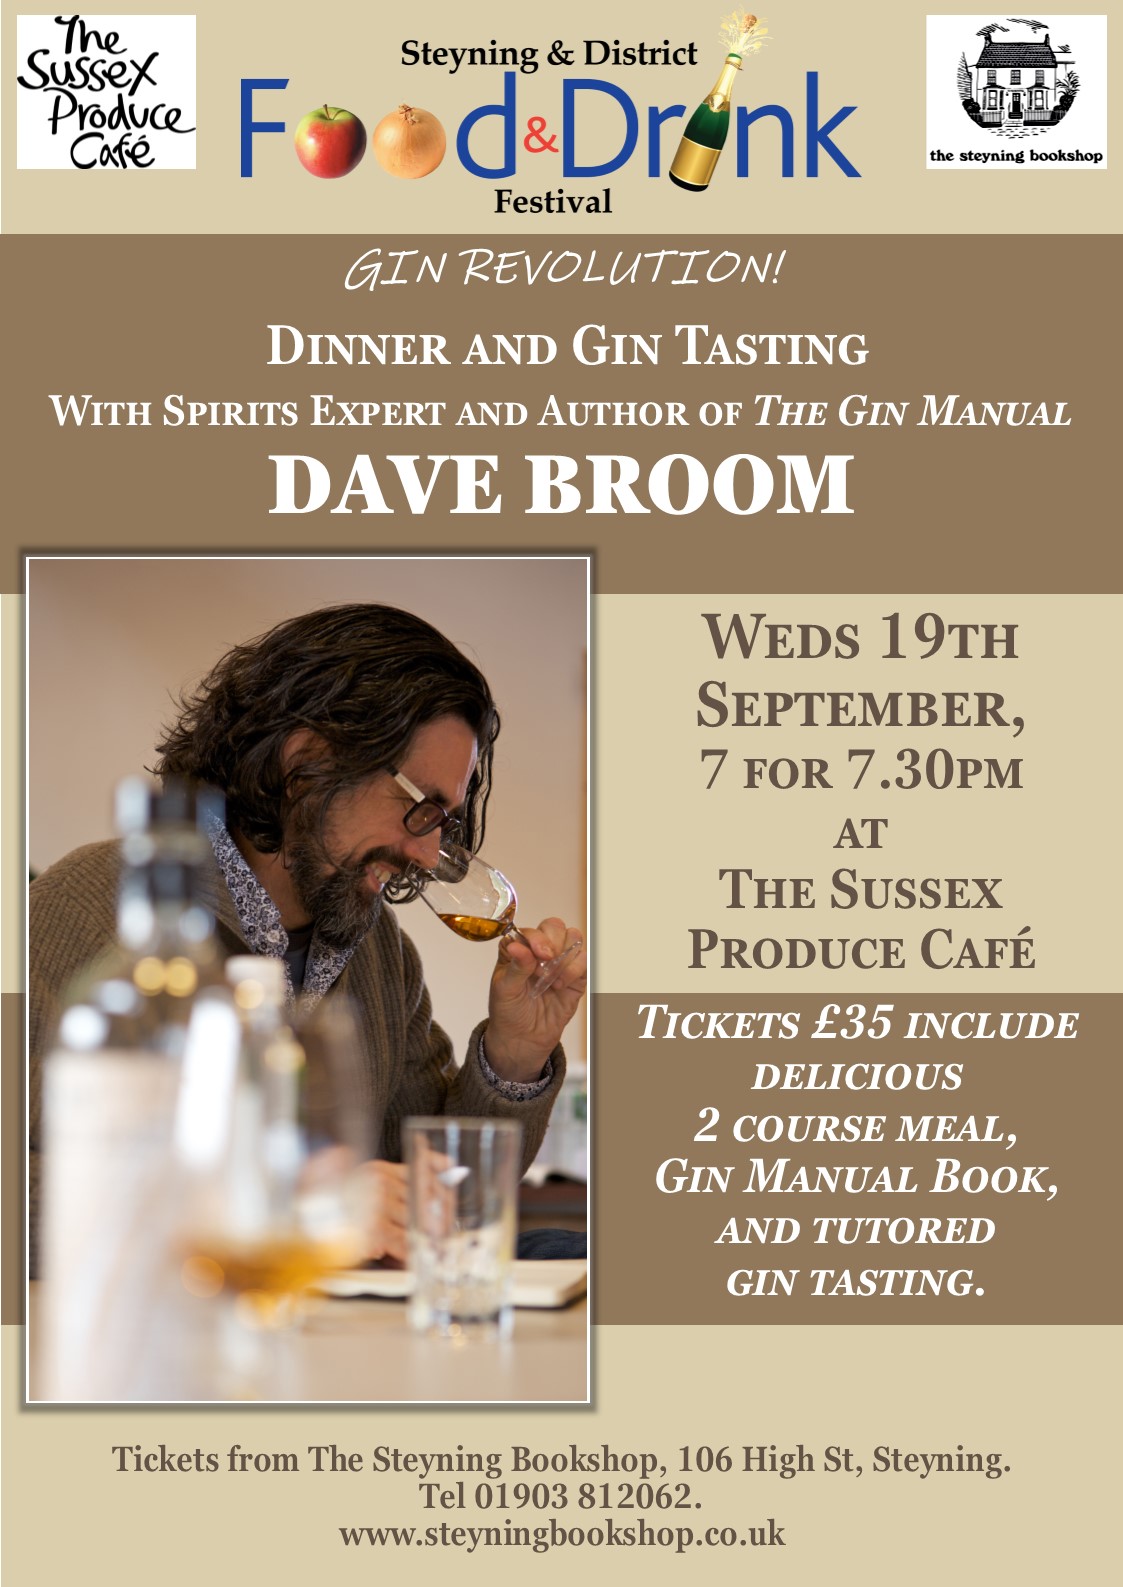 Dinner and Gin-Tasting with Dave Broom